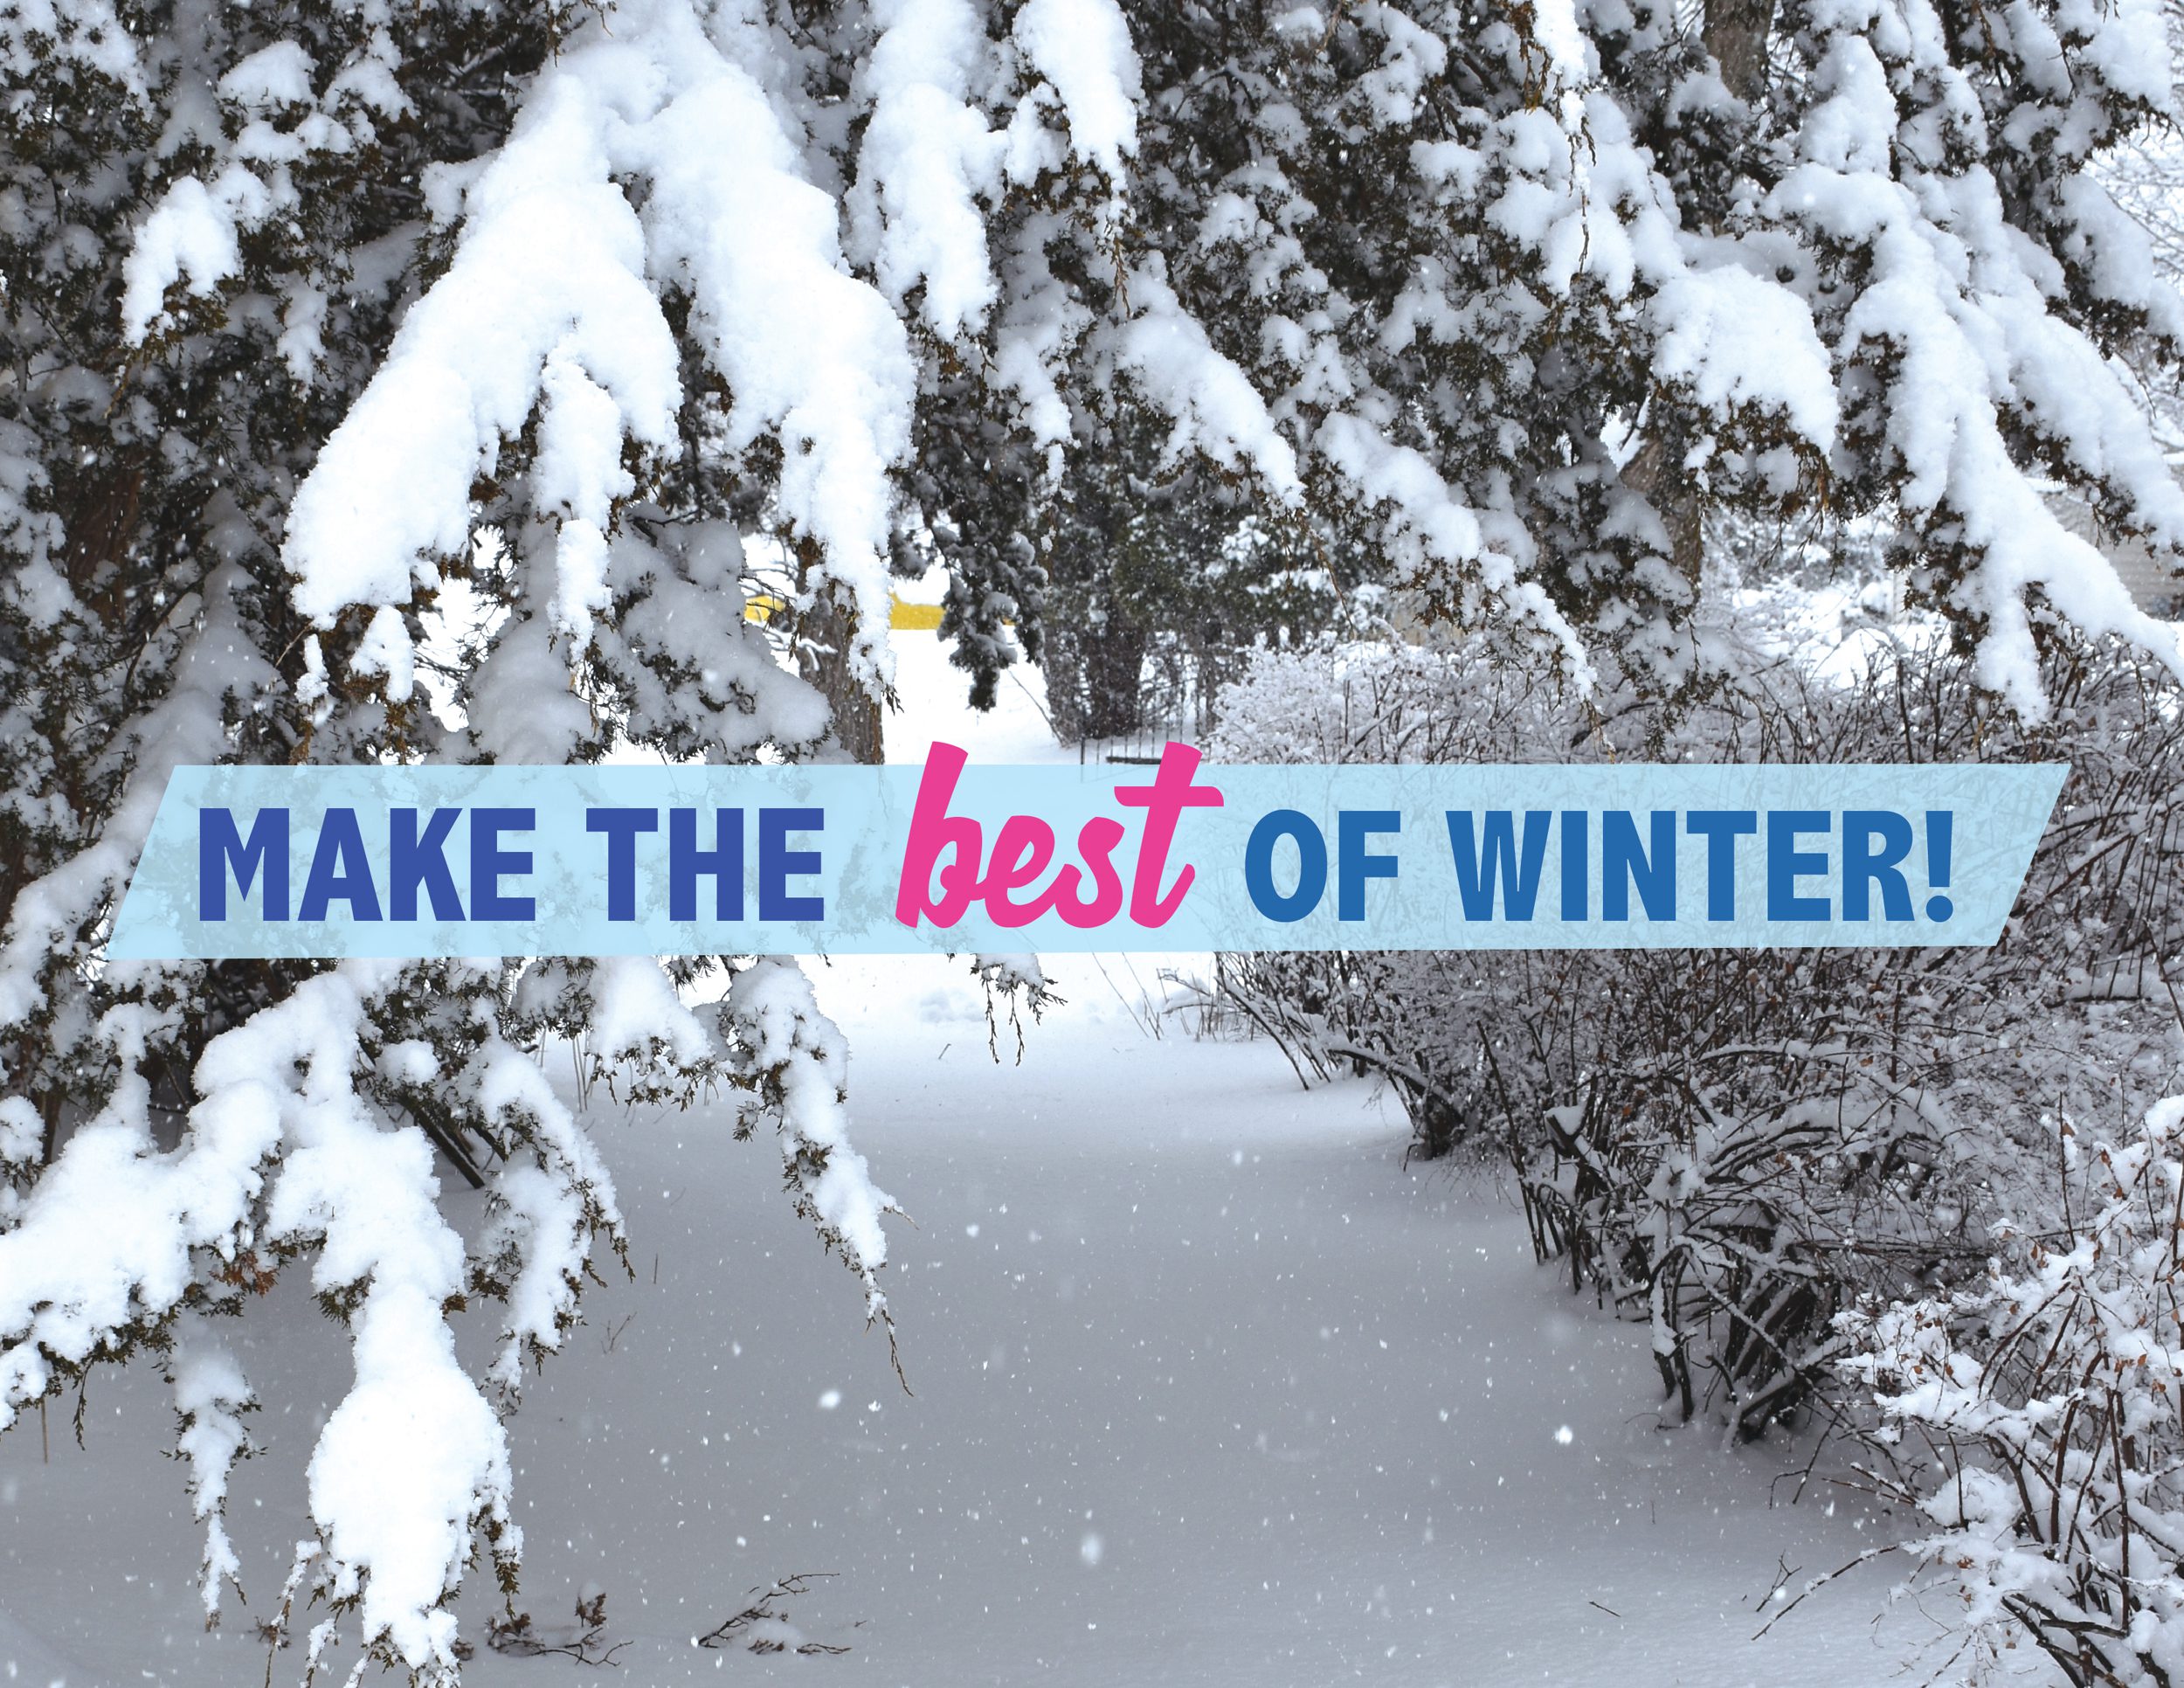 Make the Best of Winter!